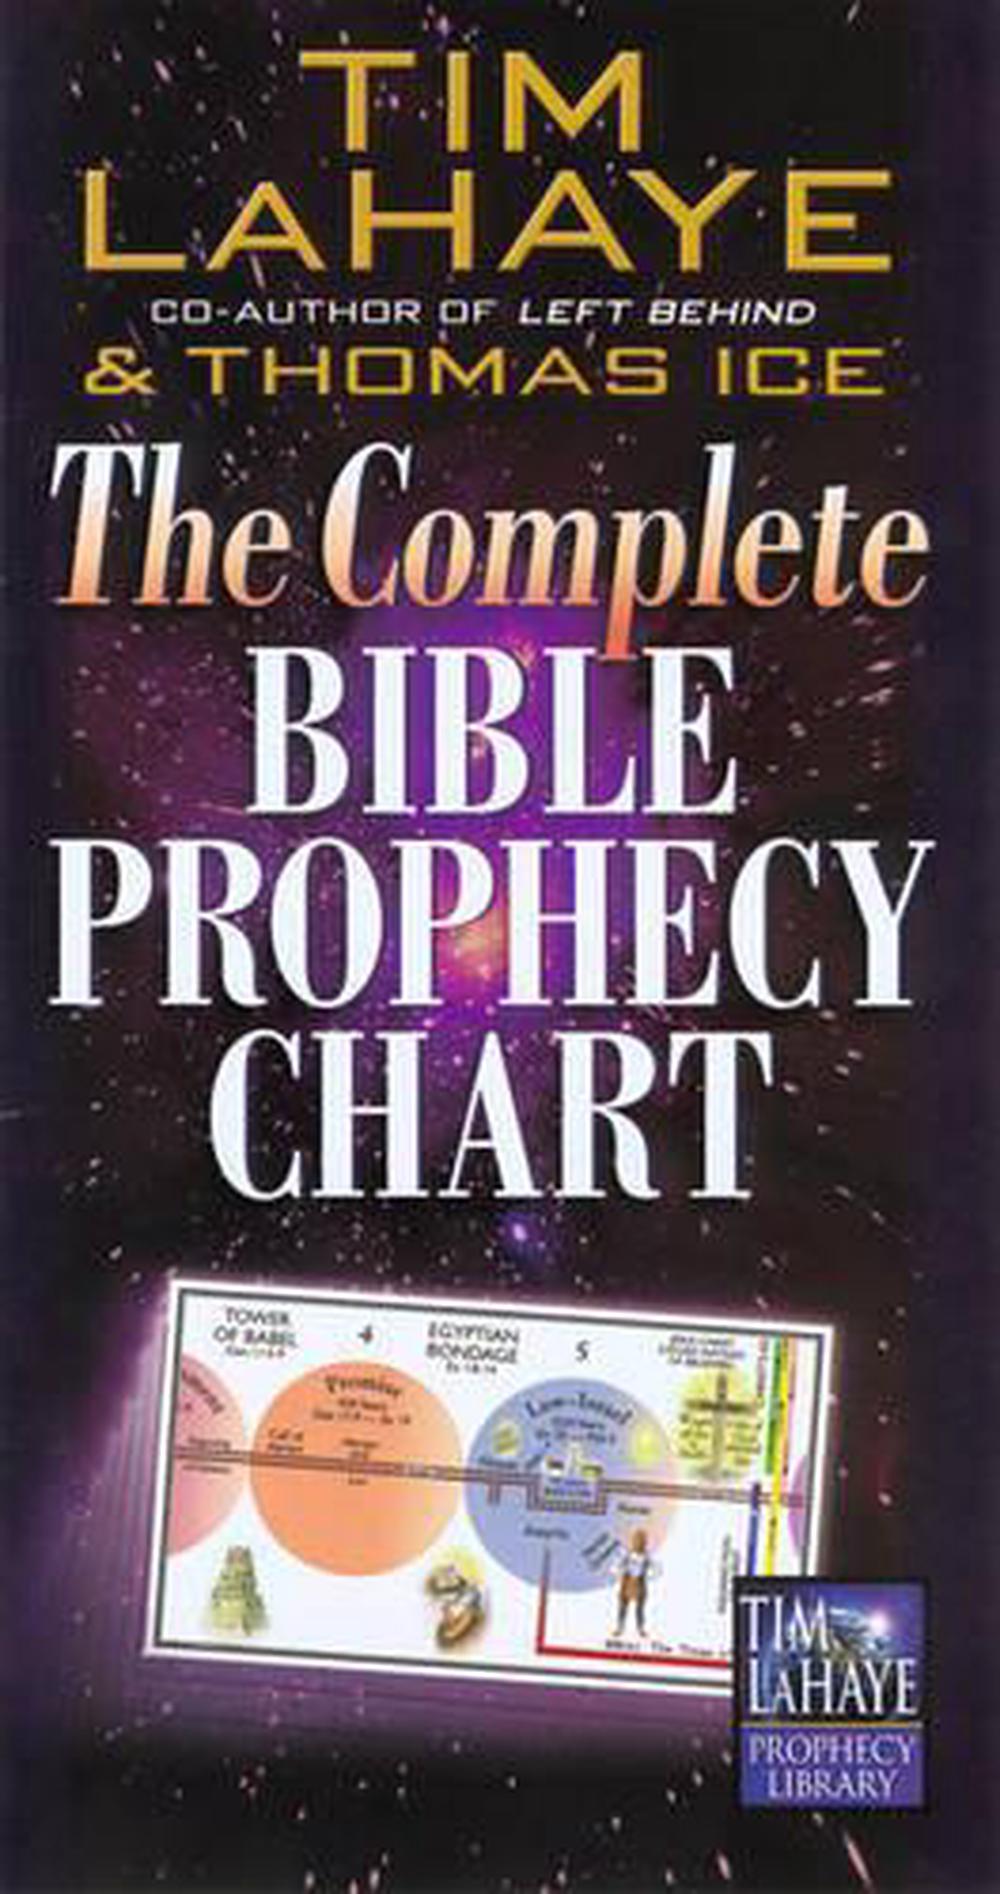 The Complete Bible Prophecy Chart By Tim Lahaye English Paperback Book Free Sh 9780736908351